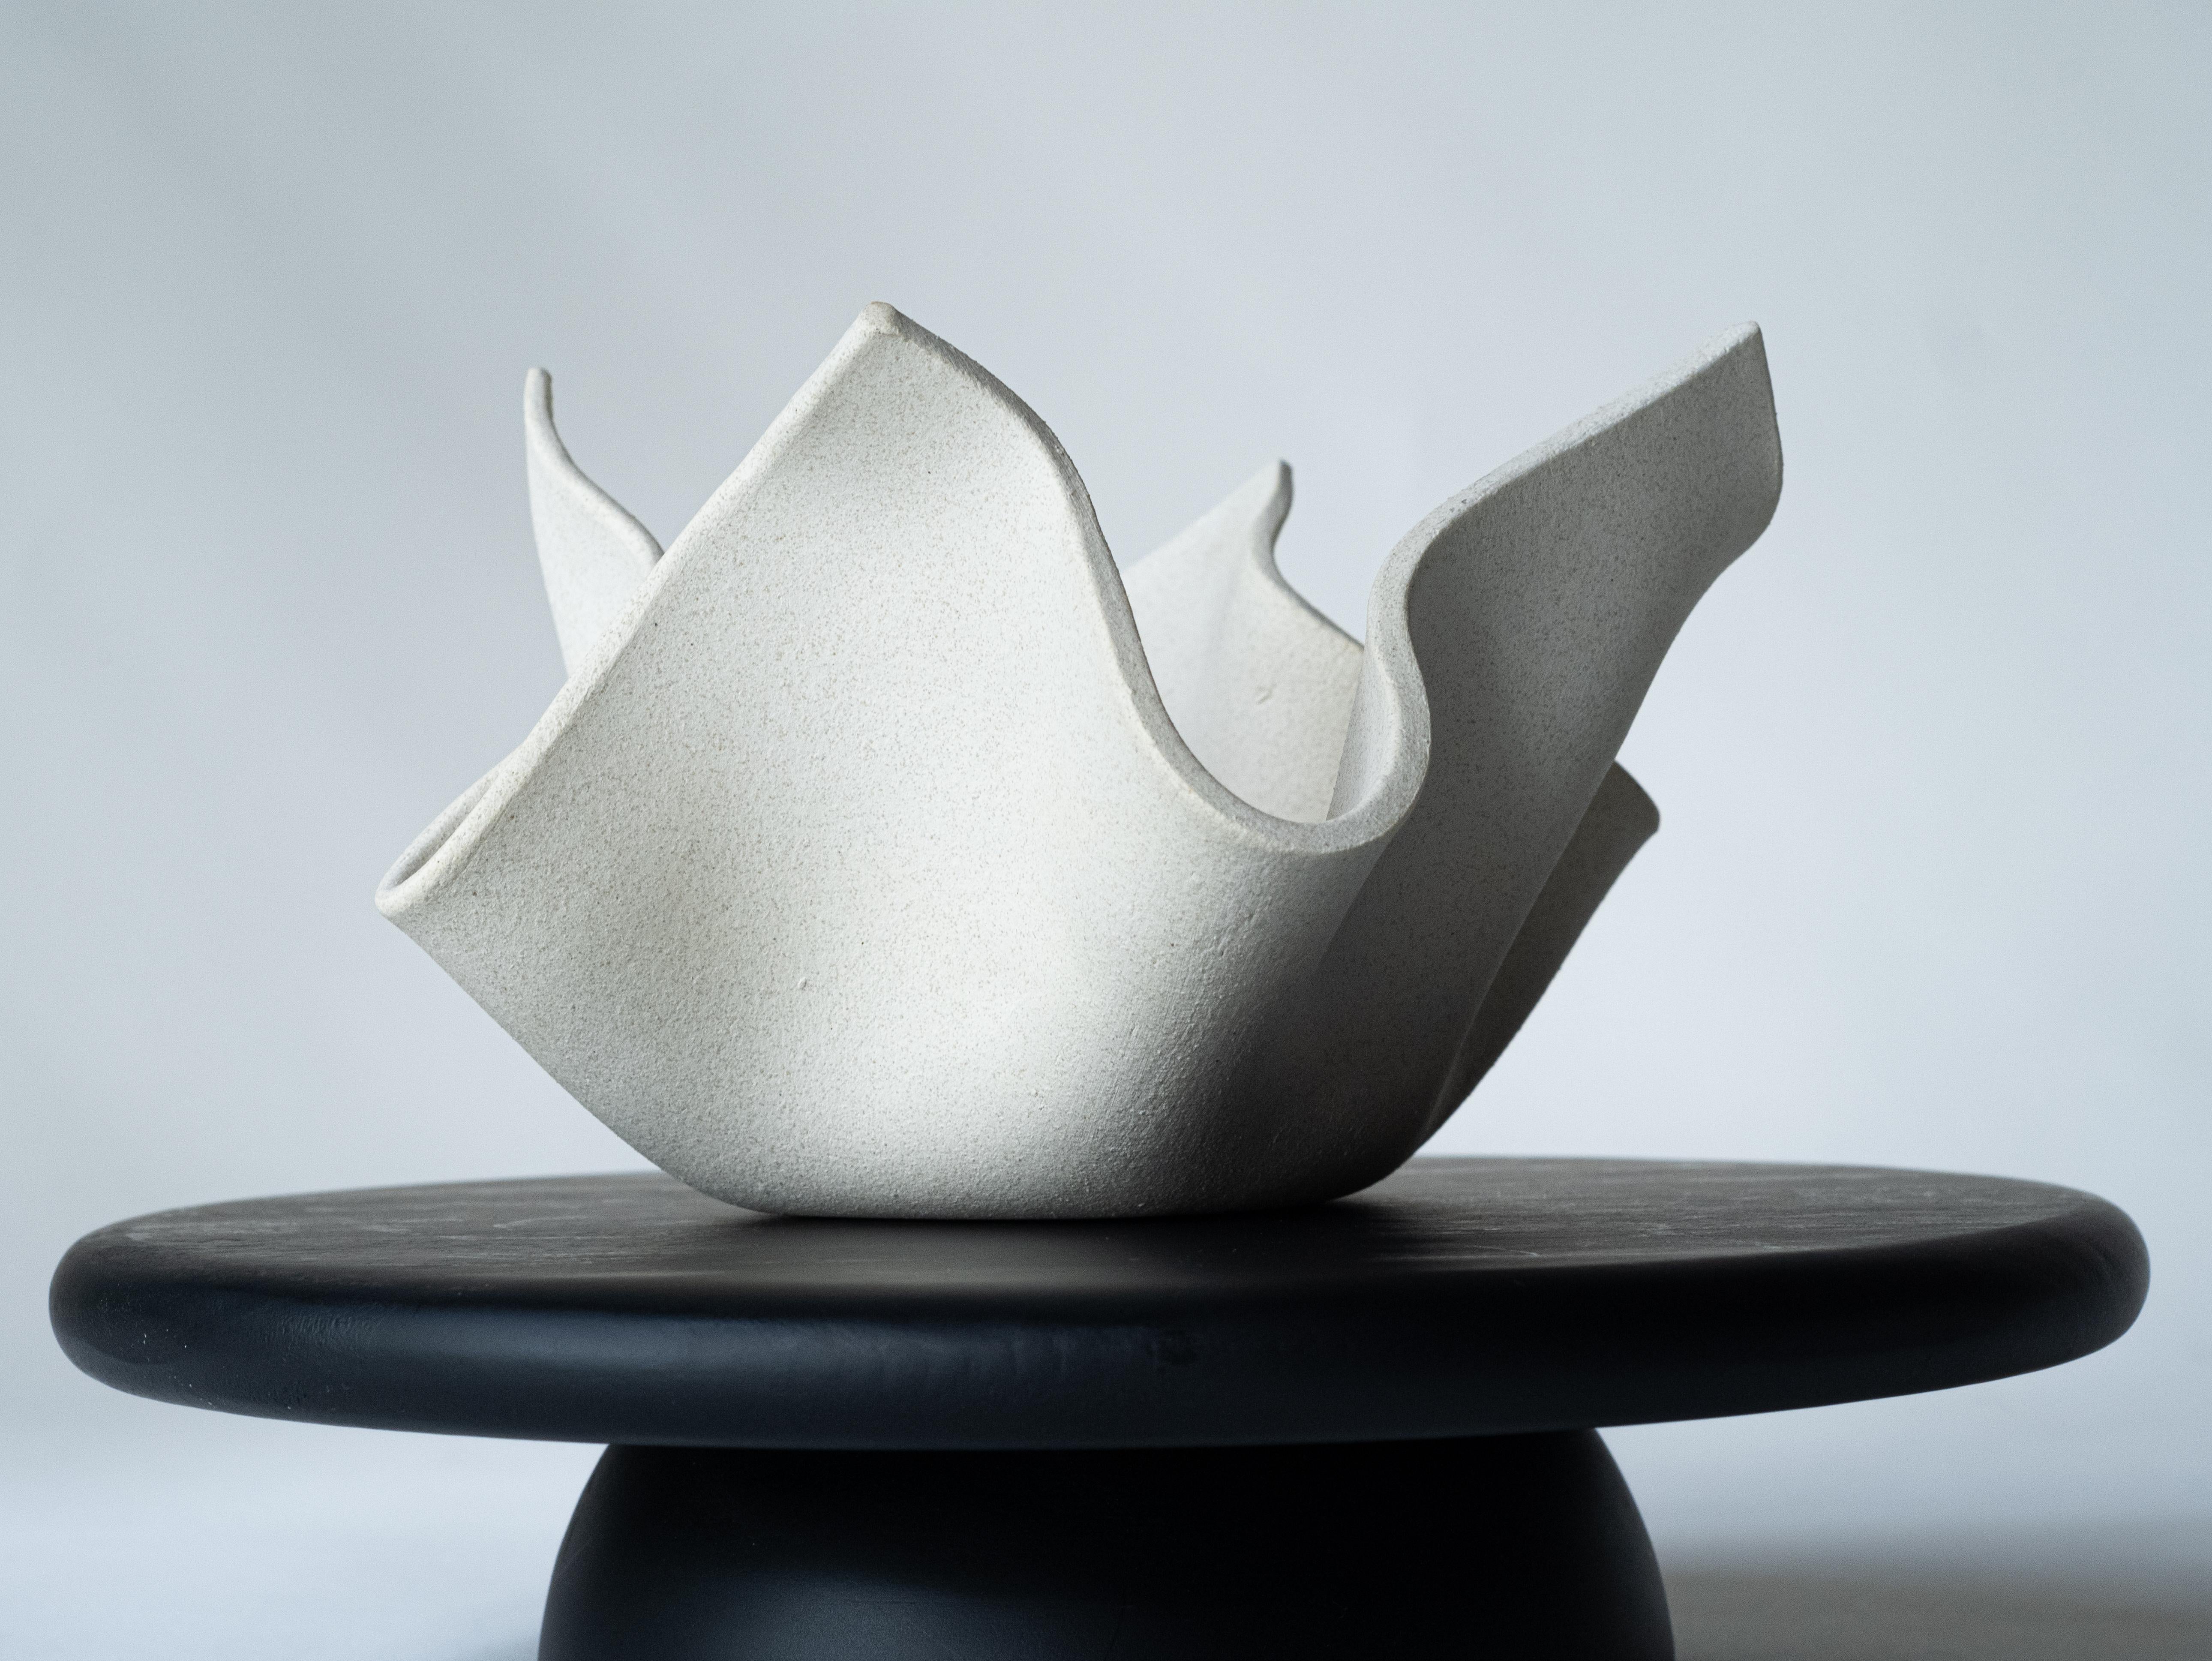 Exquisitely crafted, our windswept bowl is a testament to artisanal excellence. Meticulously handmade by skilled artisans in our studio, it emerges from pure white clay, resulting in a stunning aesthetic. Its versatility shines as it can serve as a